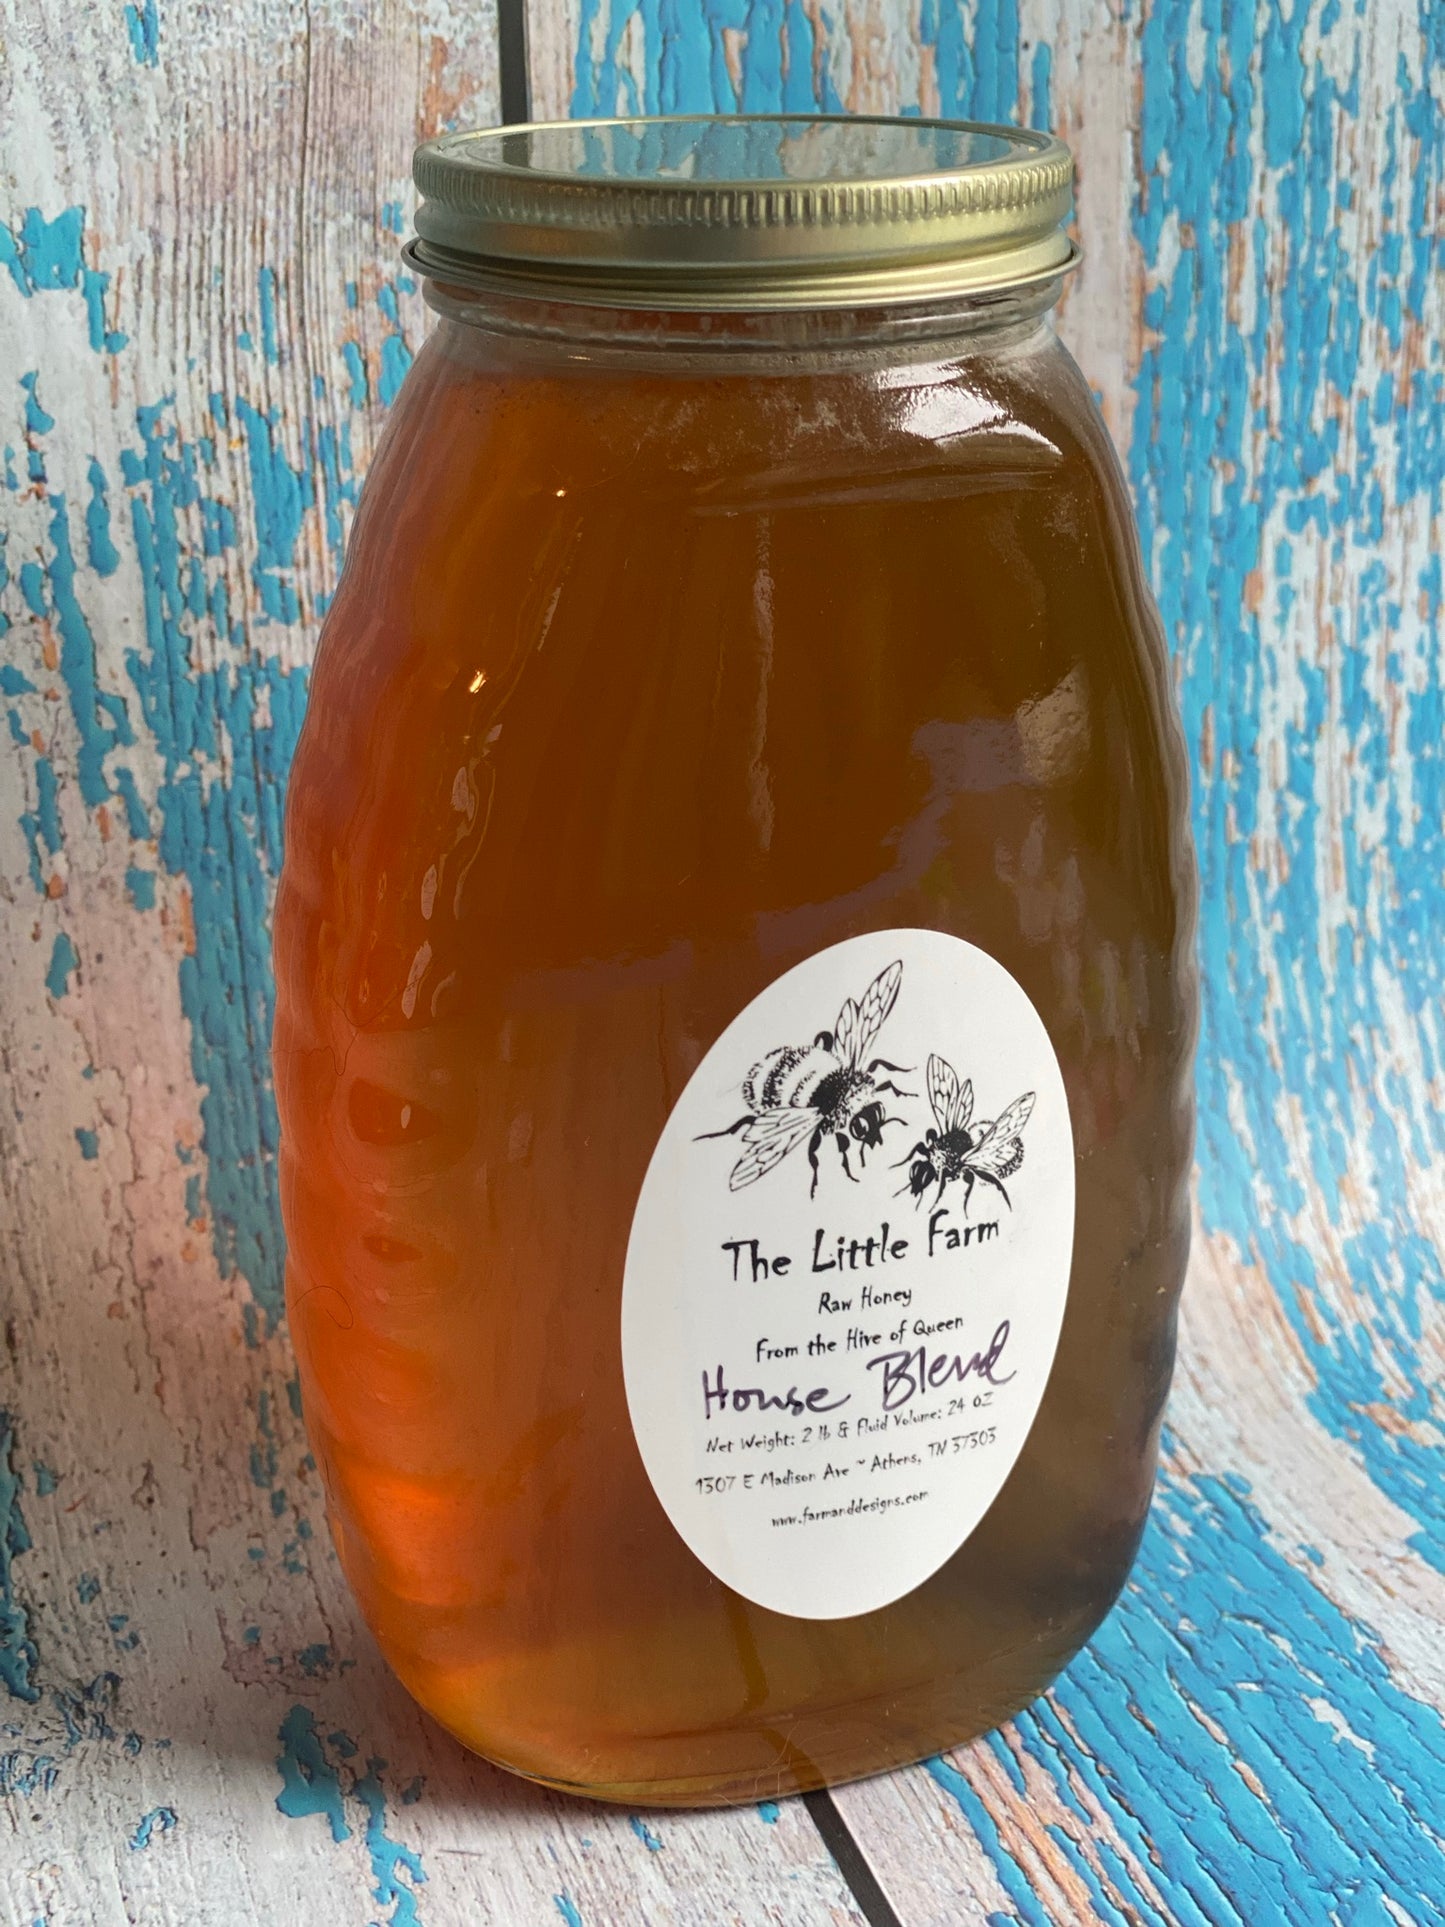 House Blend Honey from All the Queens